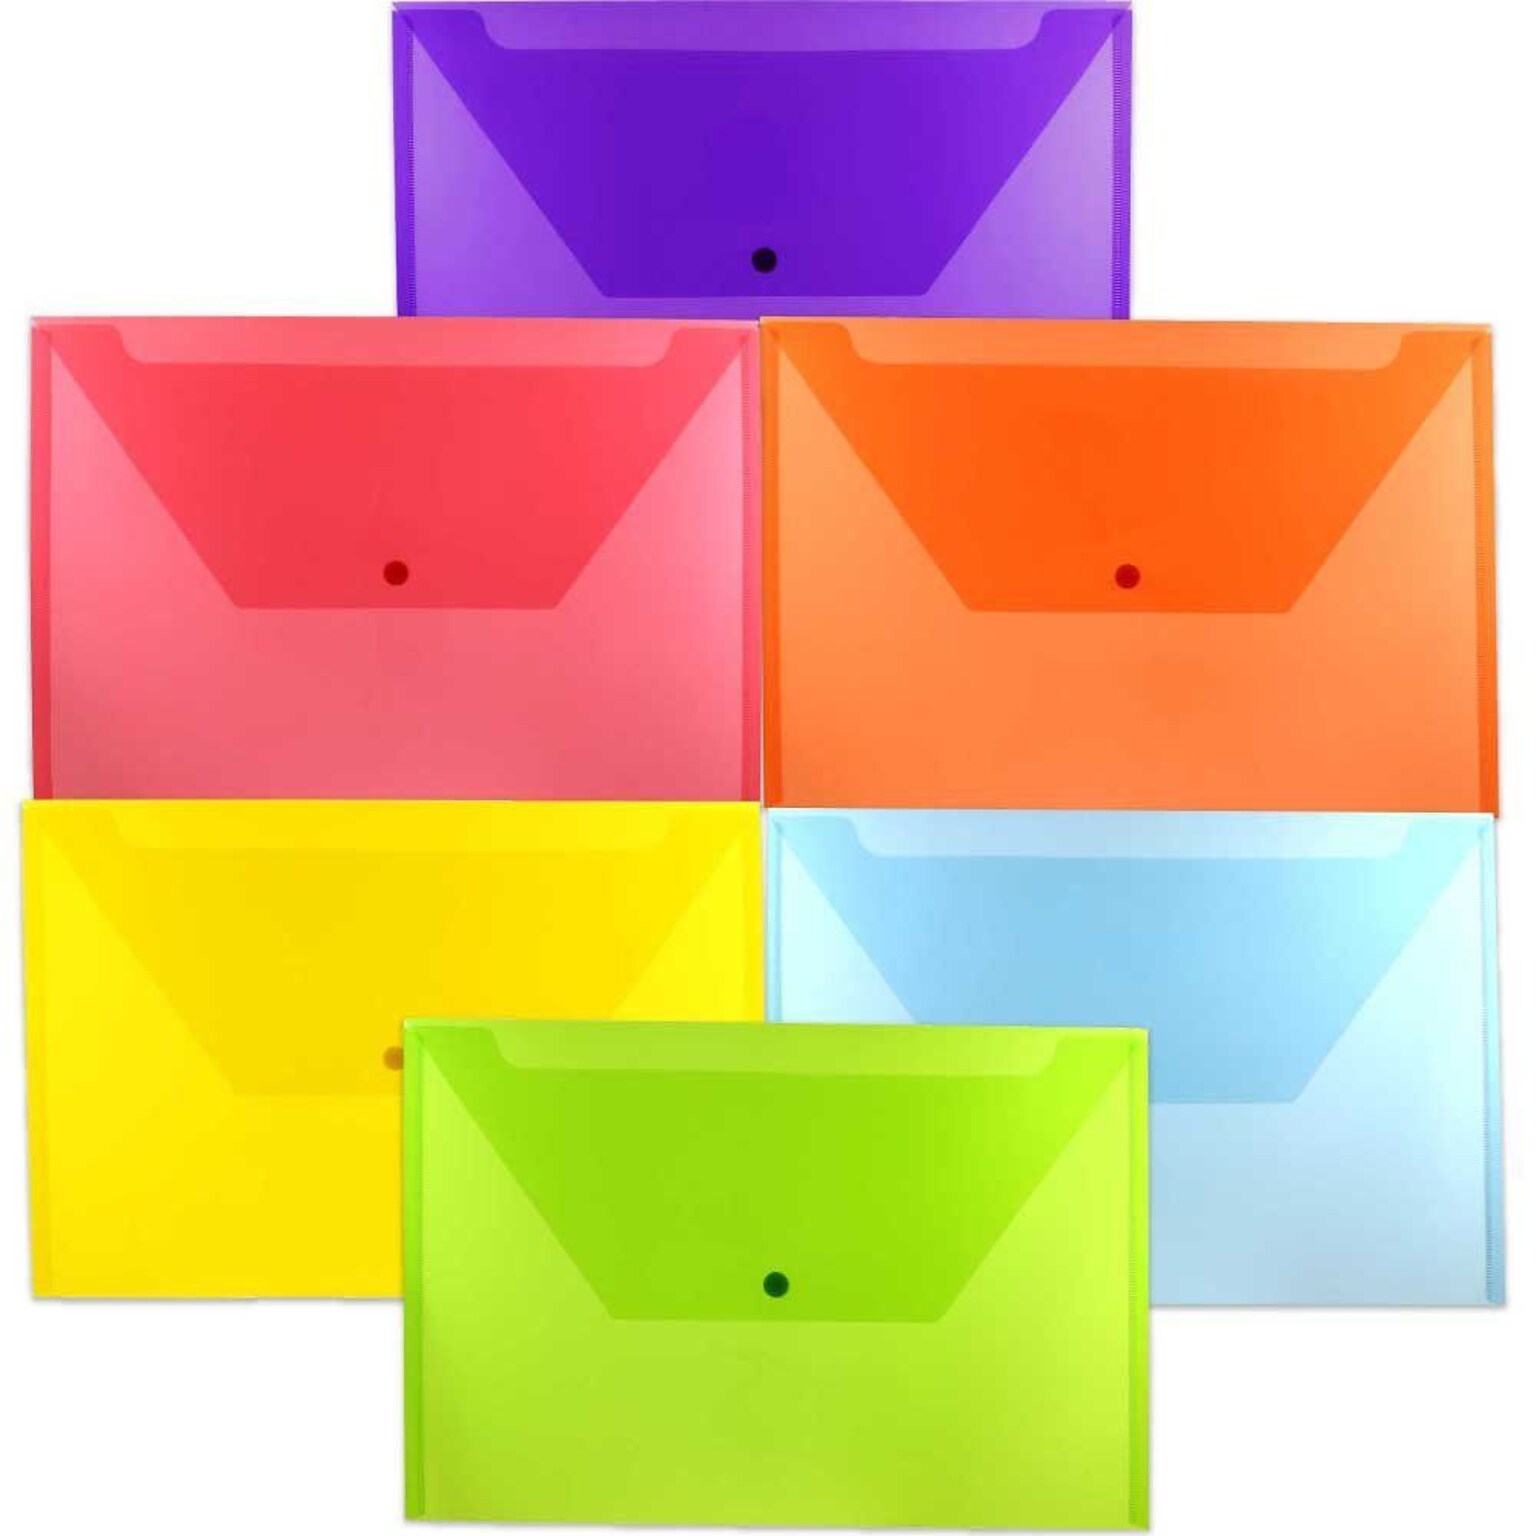 JAM Paper® Plastic Envelopes with Snap Closure, Legal Booklet, 9.75 x 14.5, Assorted Poly Colors, 6/pack (219S0ASSRTD)